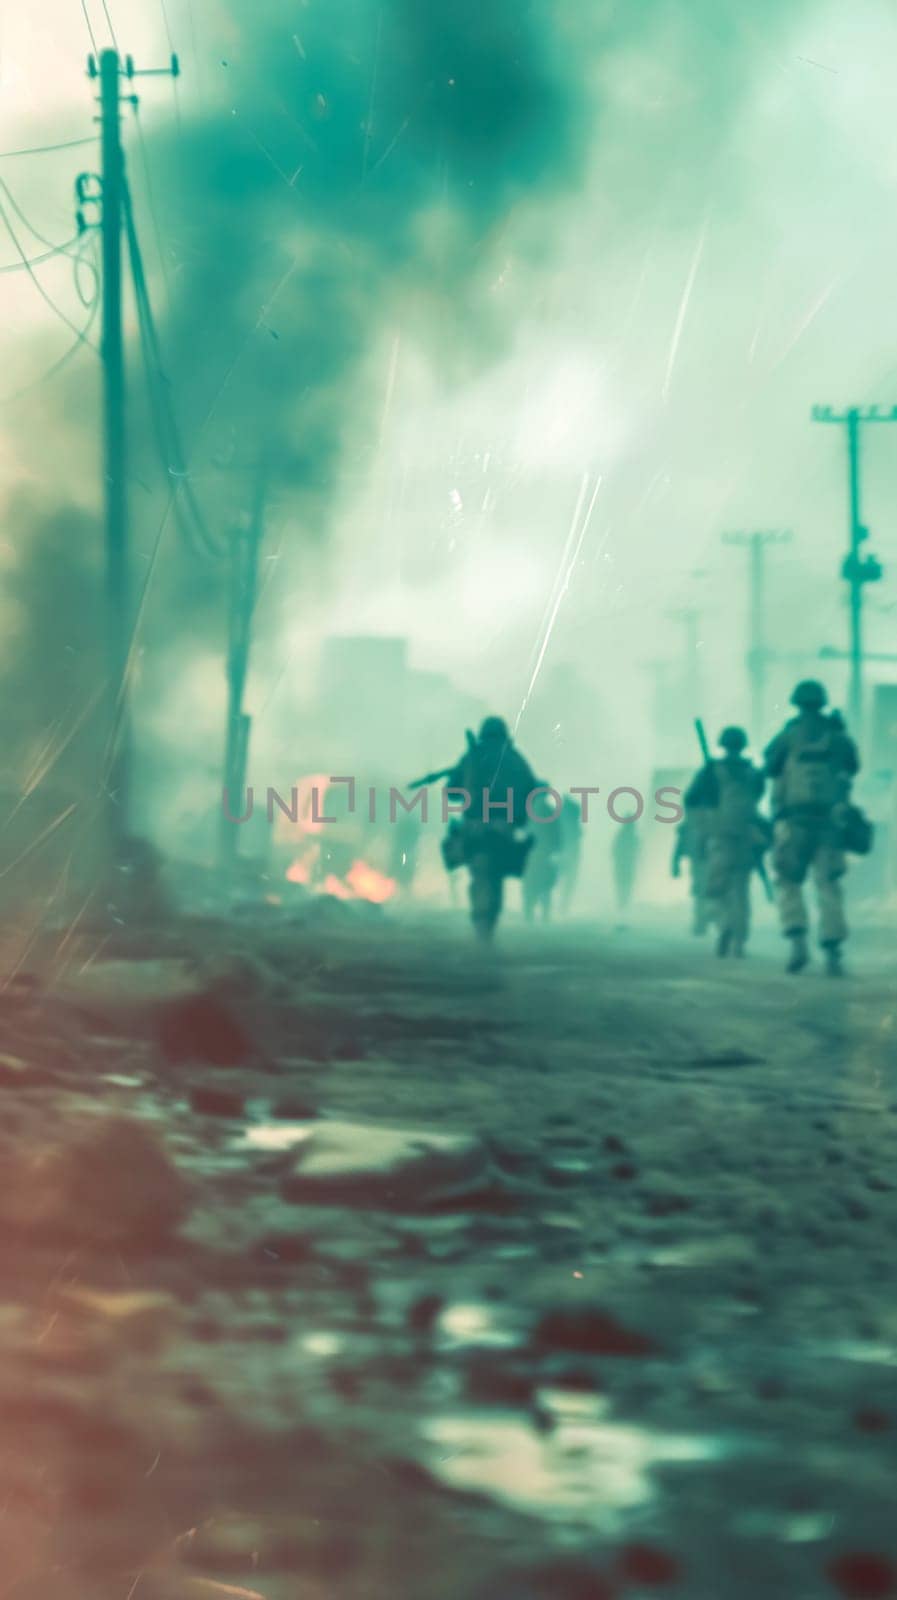 tense and chaotic scene with blurred figures of soldiers in motion amidst smoke and debris, capturing the urgency and disarray of a conflict or battle situation by Edophoto